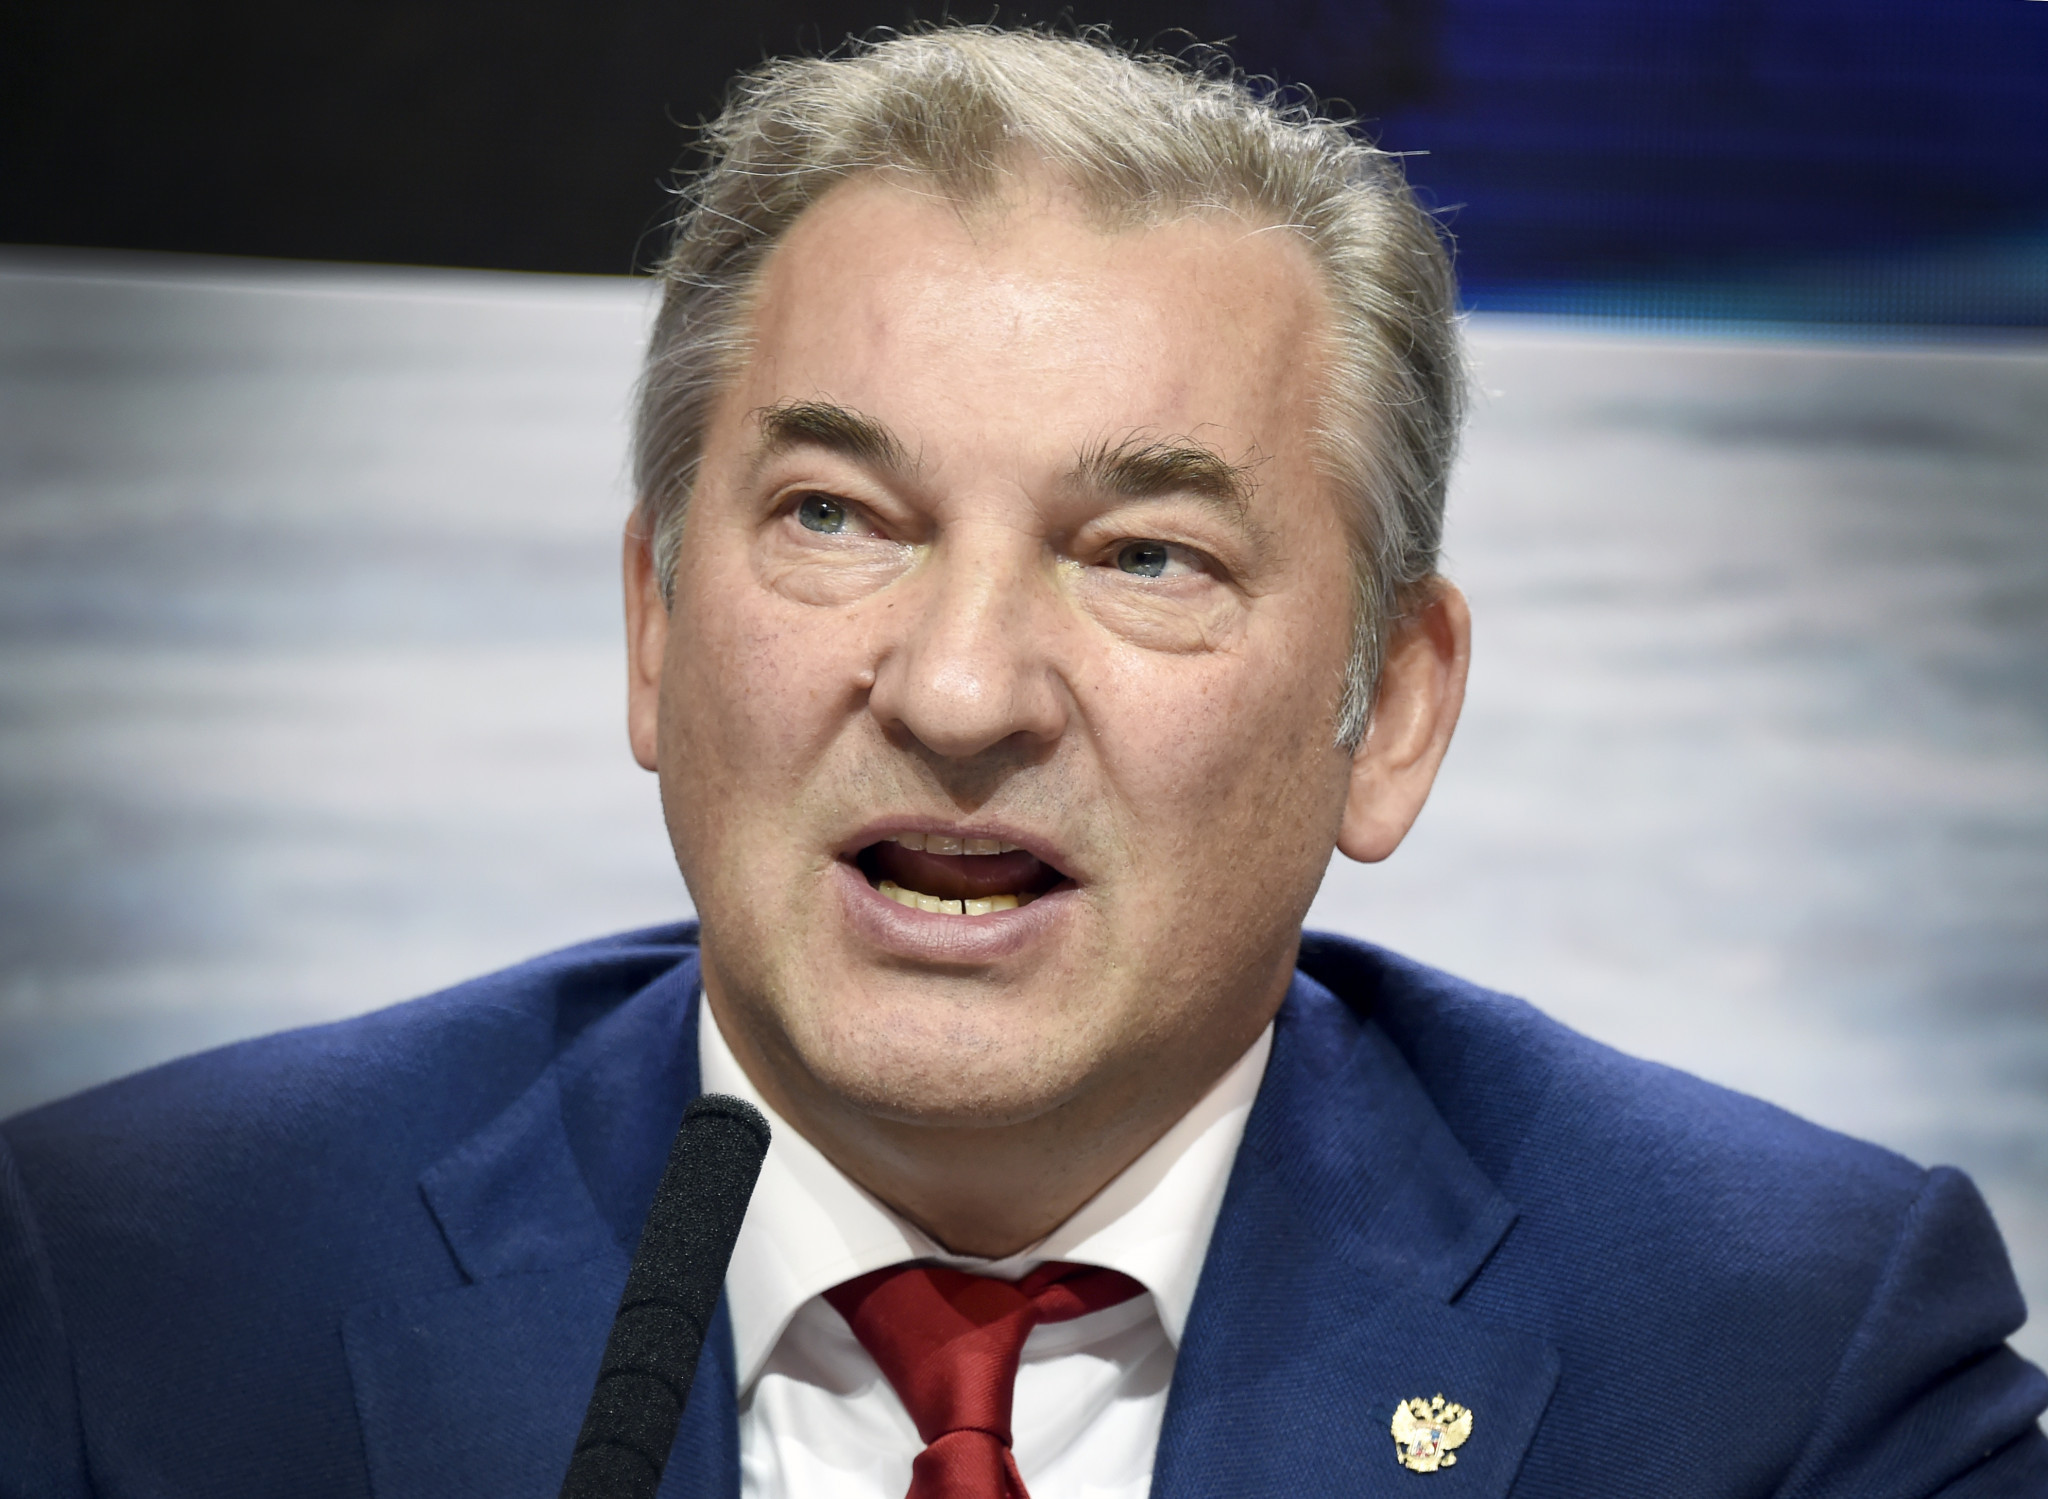 Russian Ice Hockey Federation President Tretiak included in latest round of Canadian sanctions